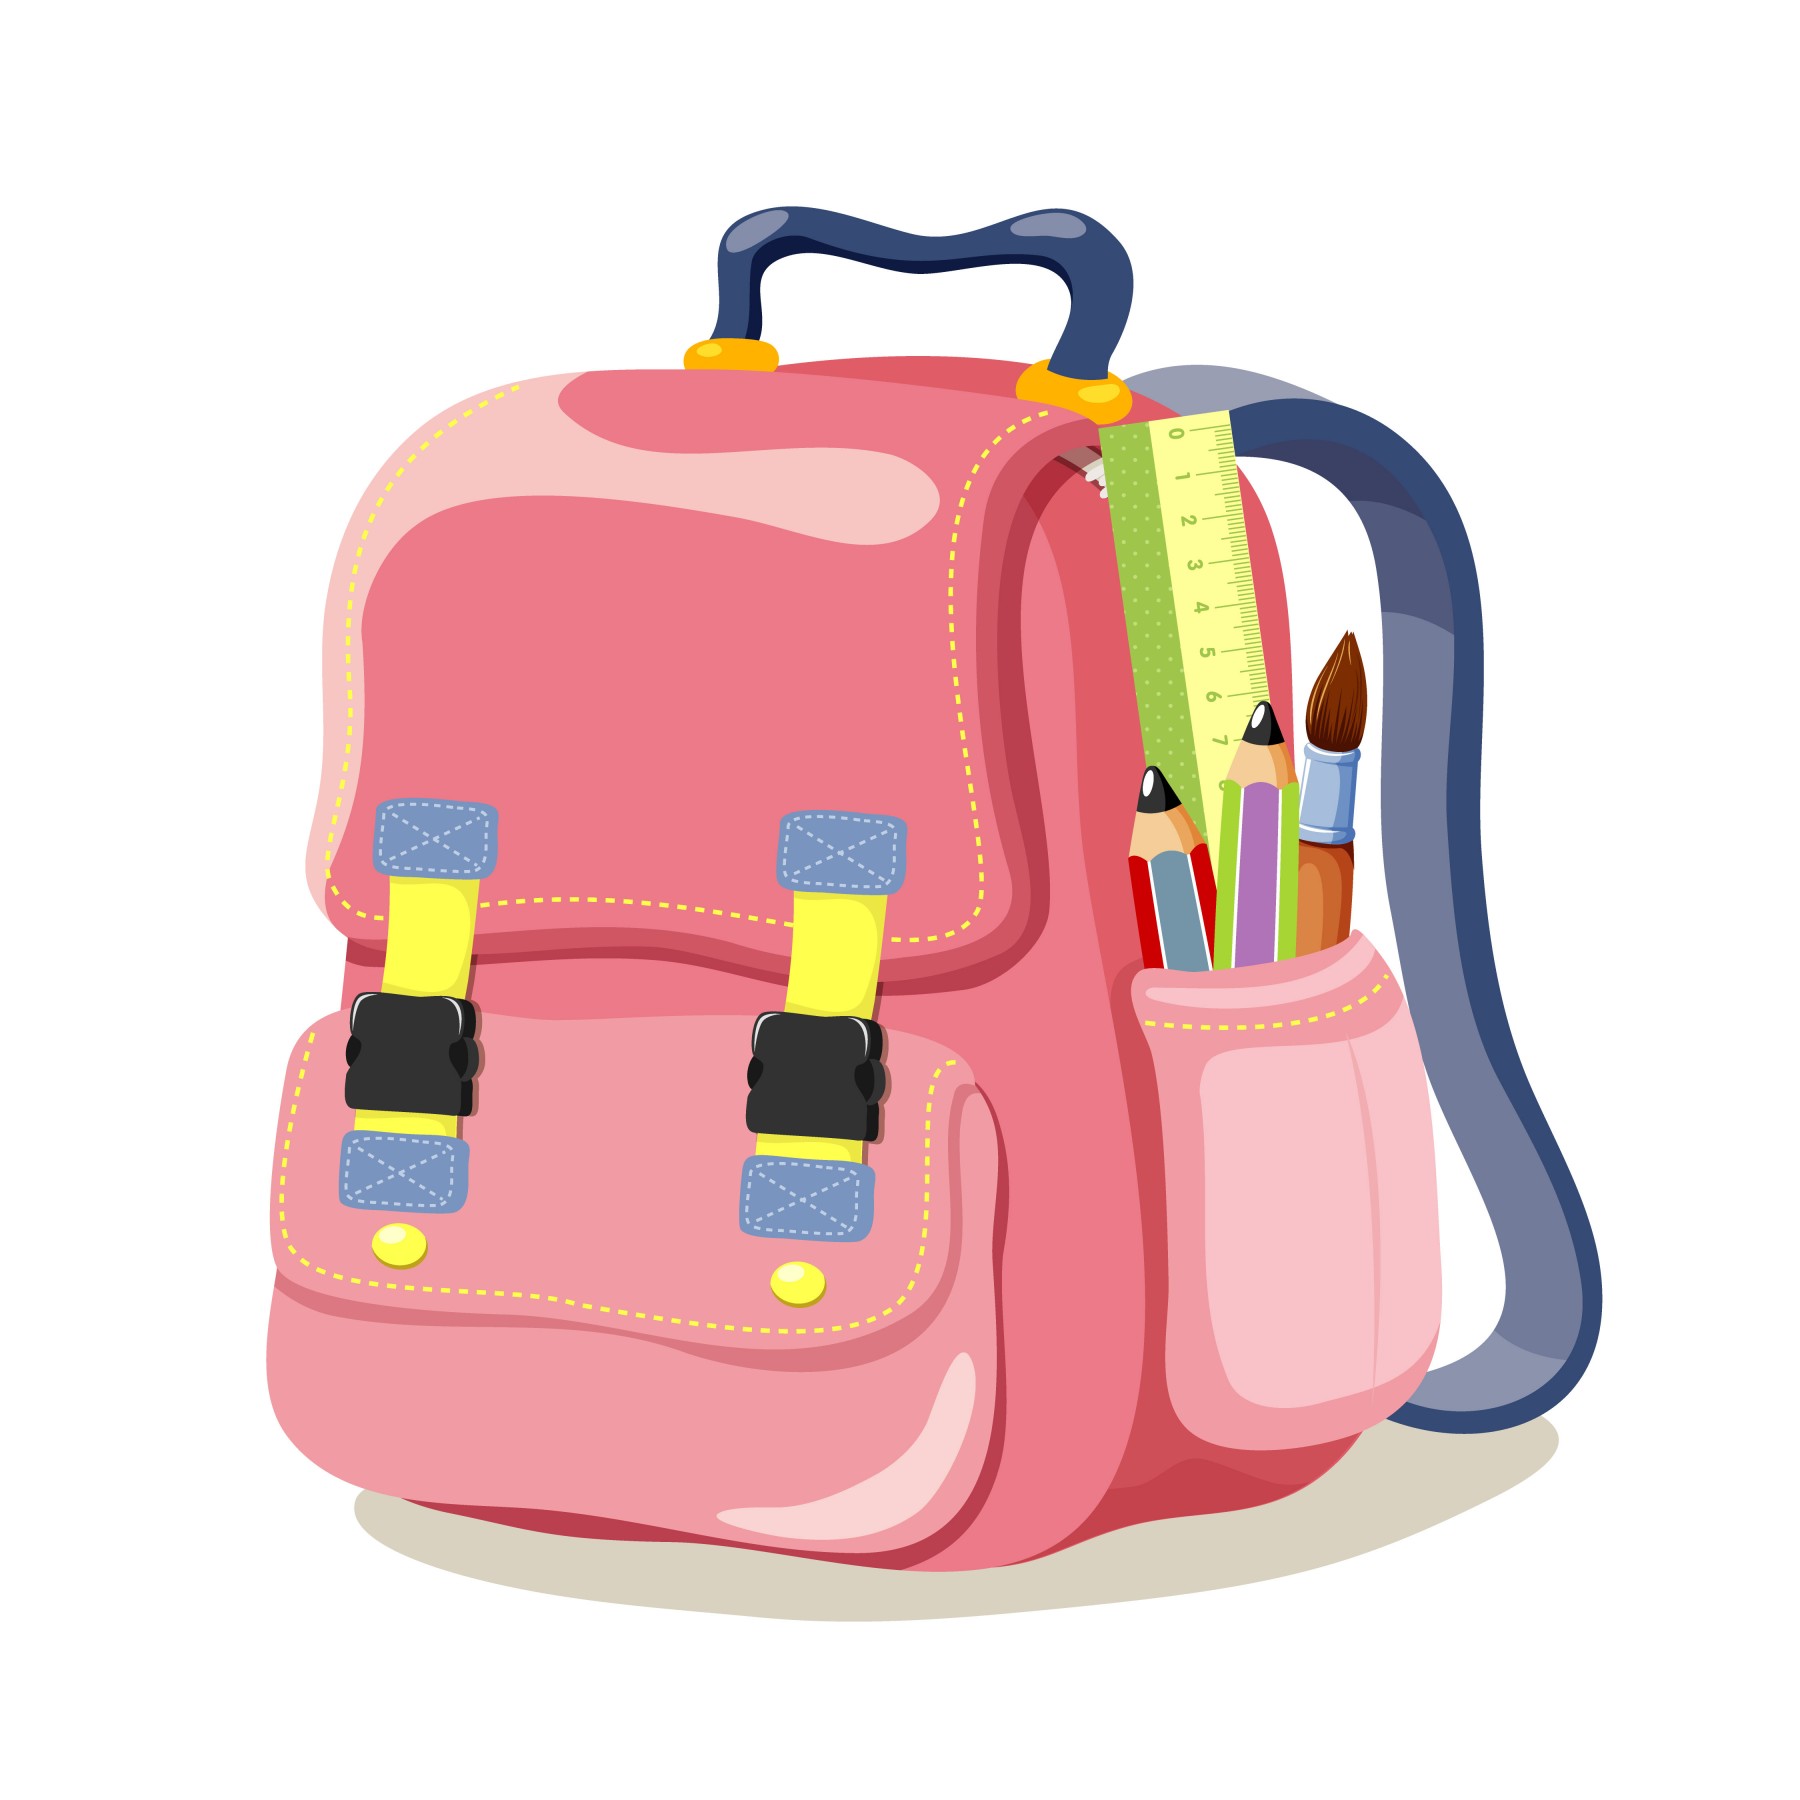 Back To School Students Come Back To School Cartoon Images Children In